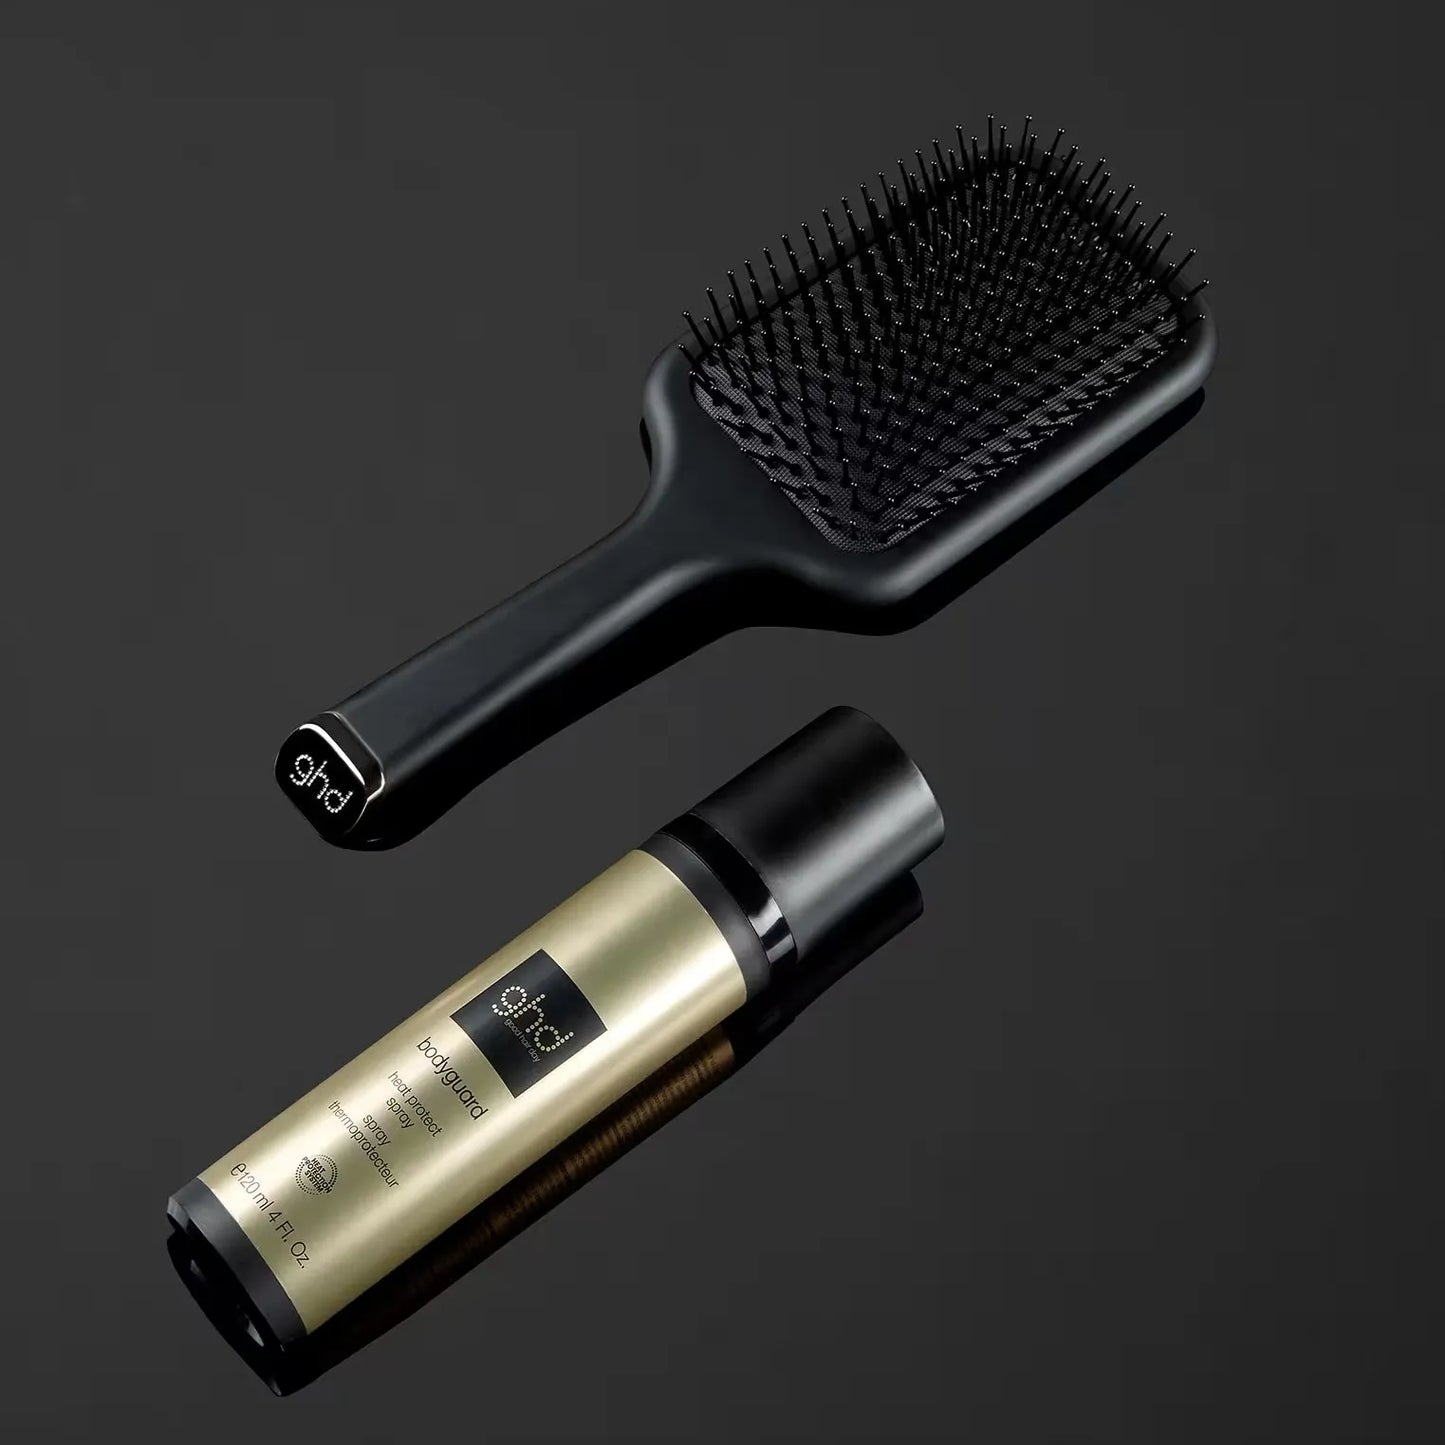 Ghd Styling Duo Gift Set termoprotettore capelli e spazzola